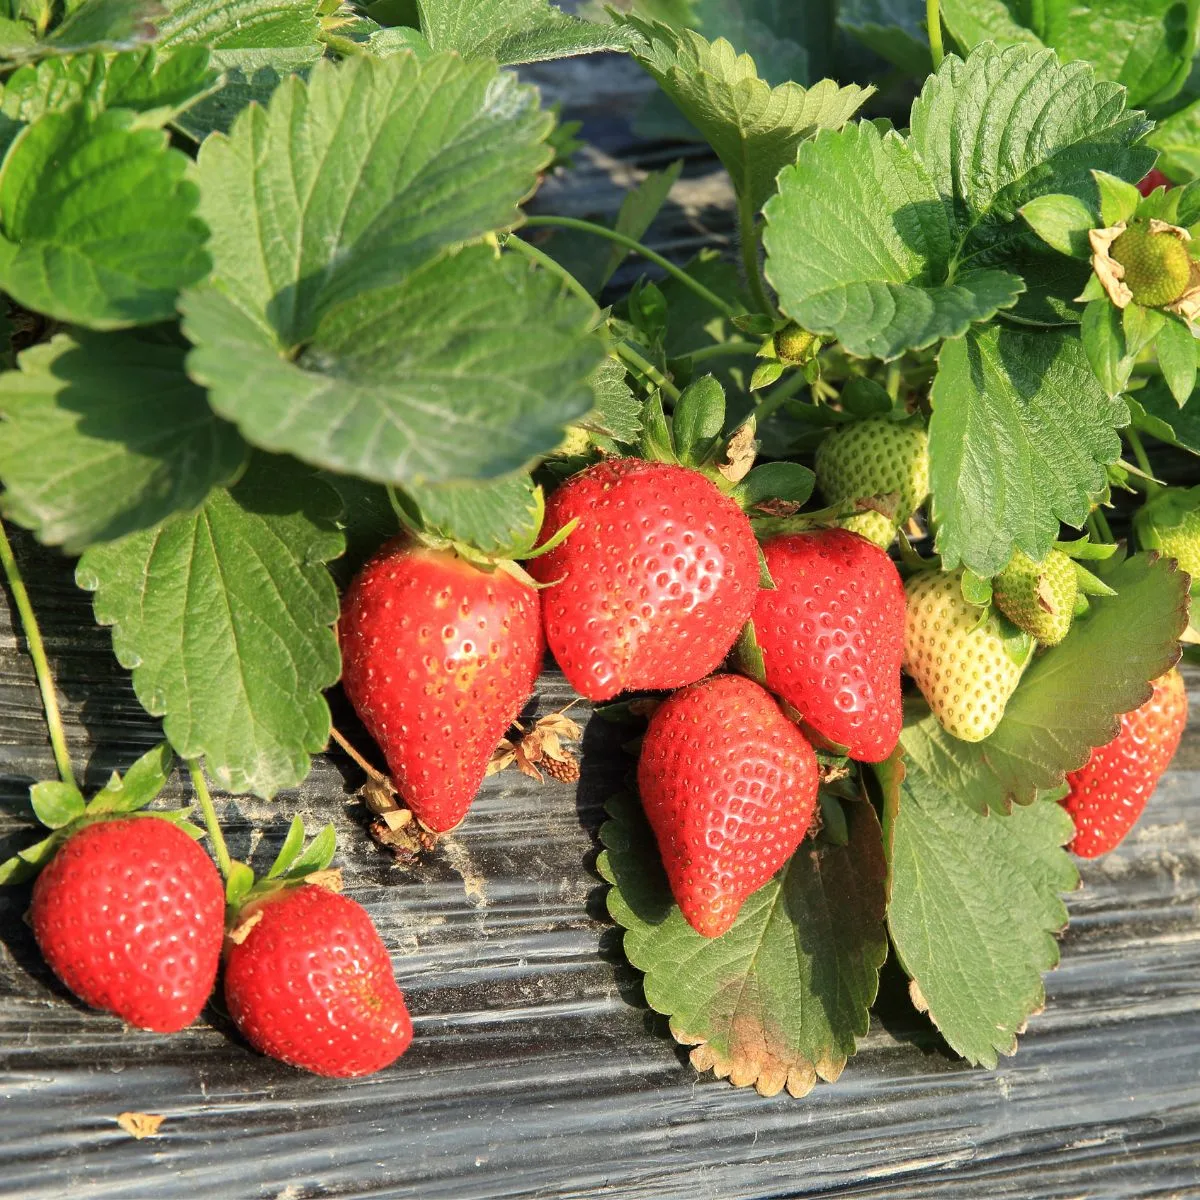 Ripe strawberries ready to be harvested. 